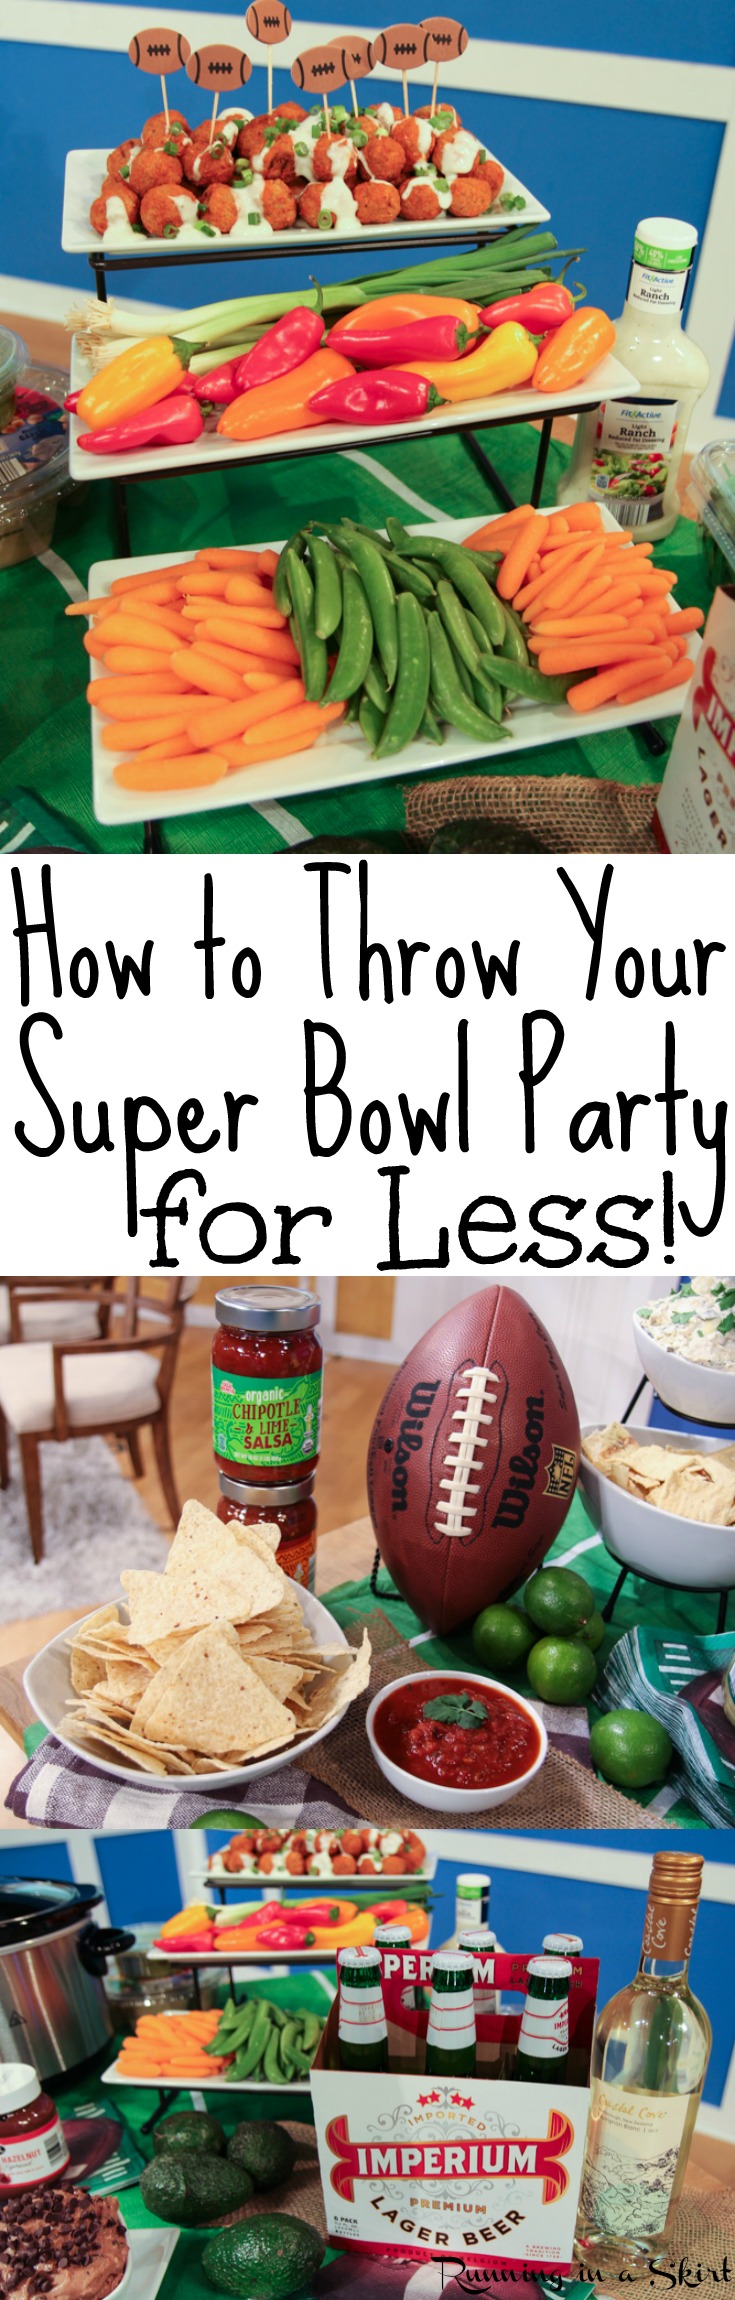 Food ideas for a Super Bowl Party on a budget.  Includes a menu with appetizers, snacks, drinks, desserts and recipes.  Healthy, gluten free and vegetarian options.  Includes the best tips for throwing your party for less. @aldiusa / Running in a Skirt via @juliewunder